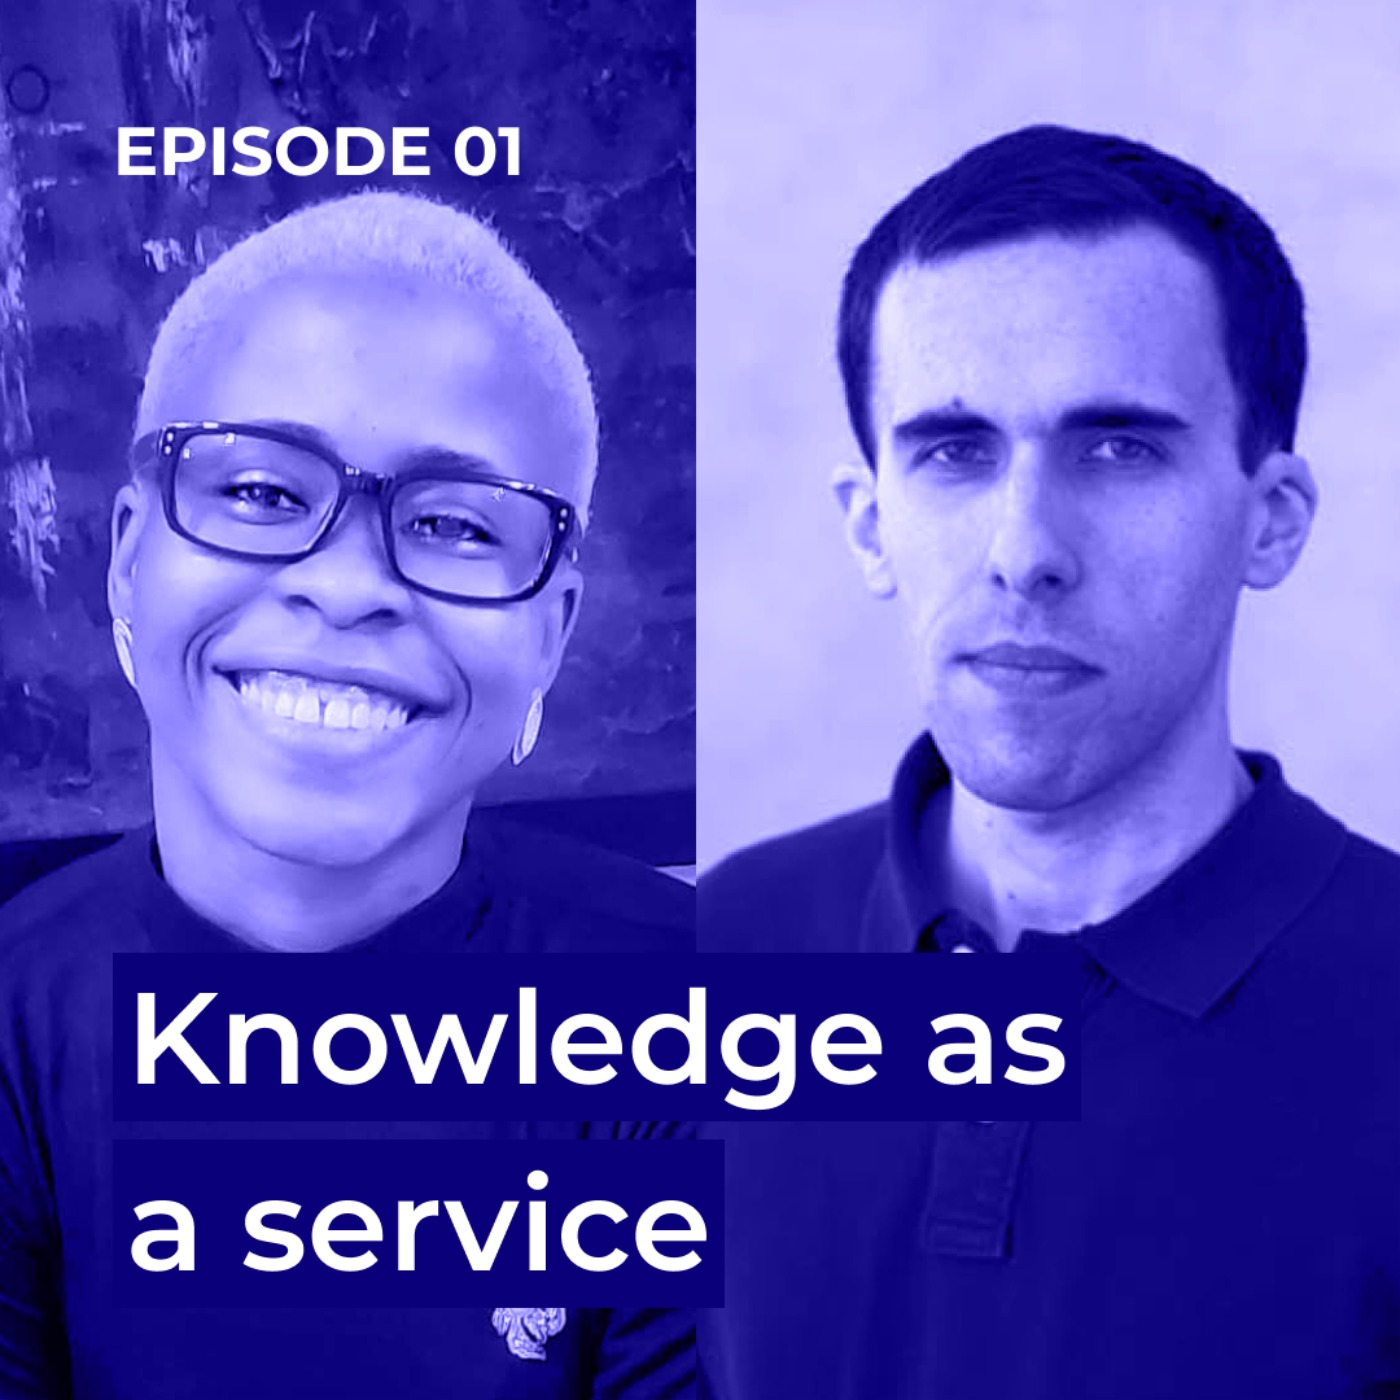 Knowledge as a service